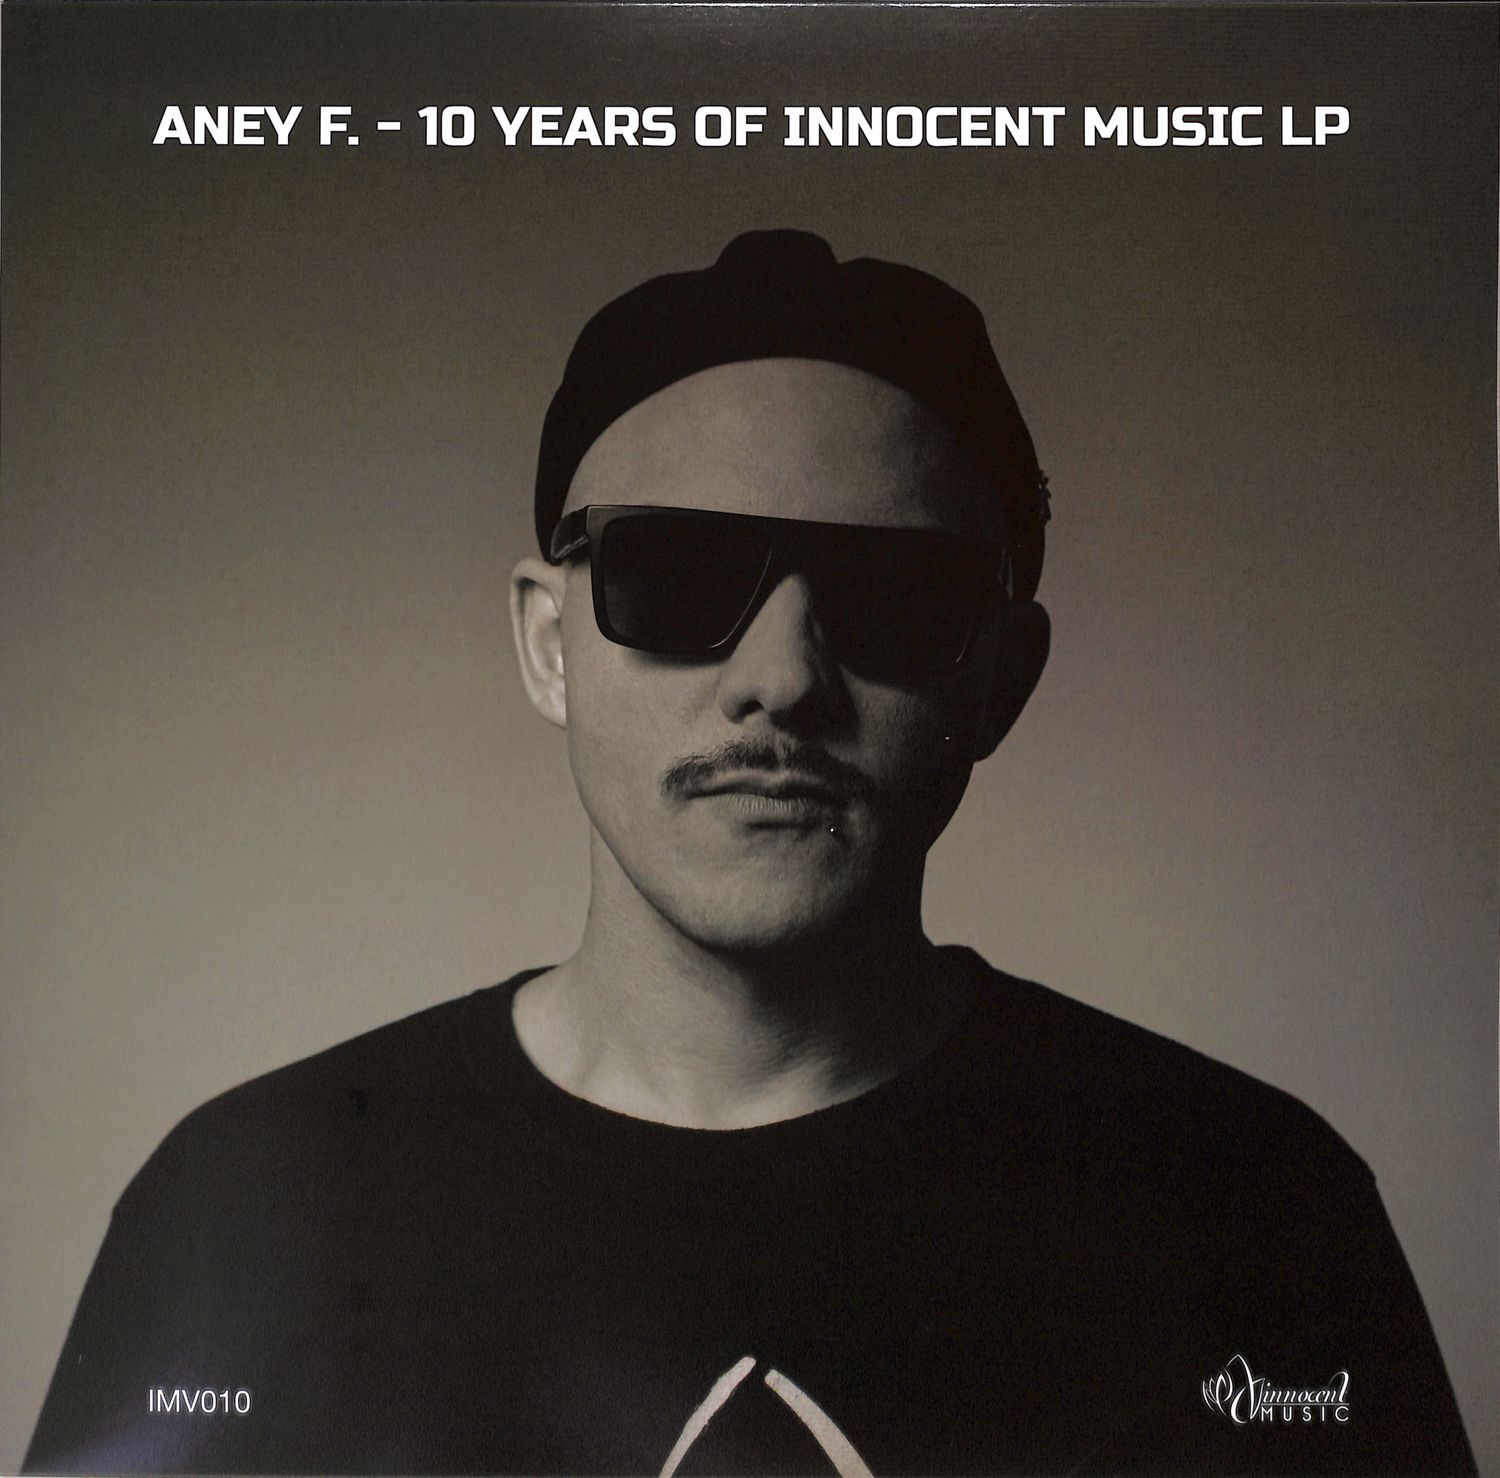 Aney F. - 10 YEARS OF INNOCENT MUSIC 